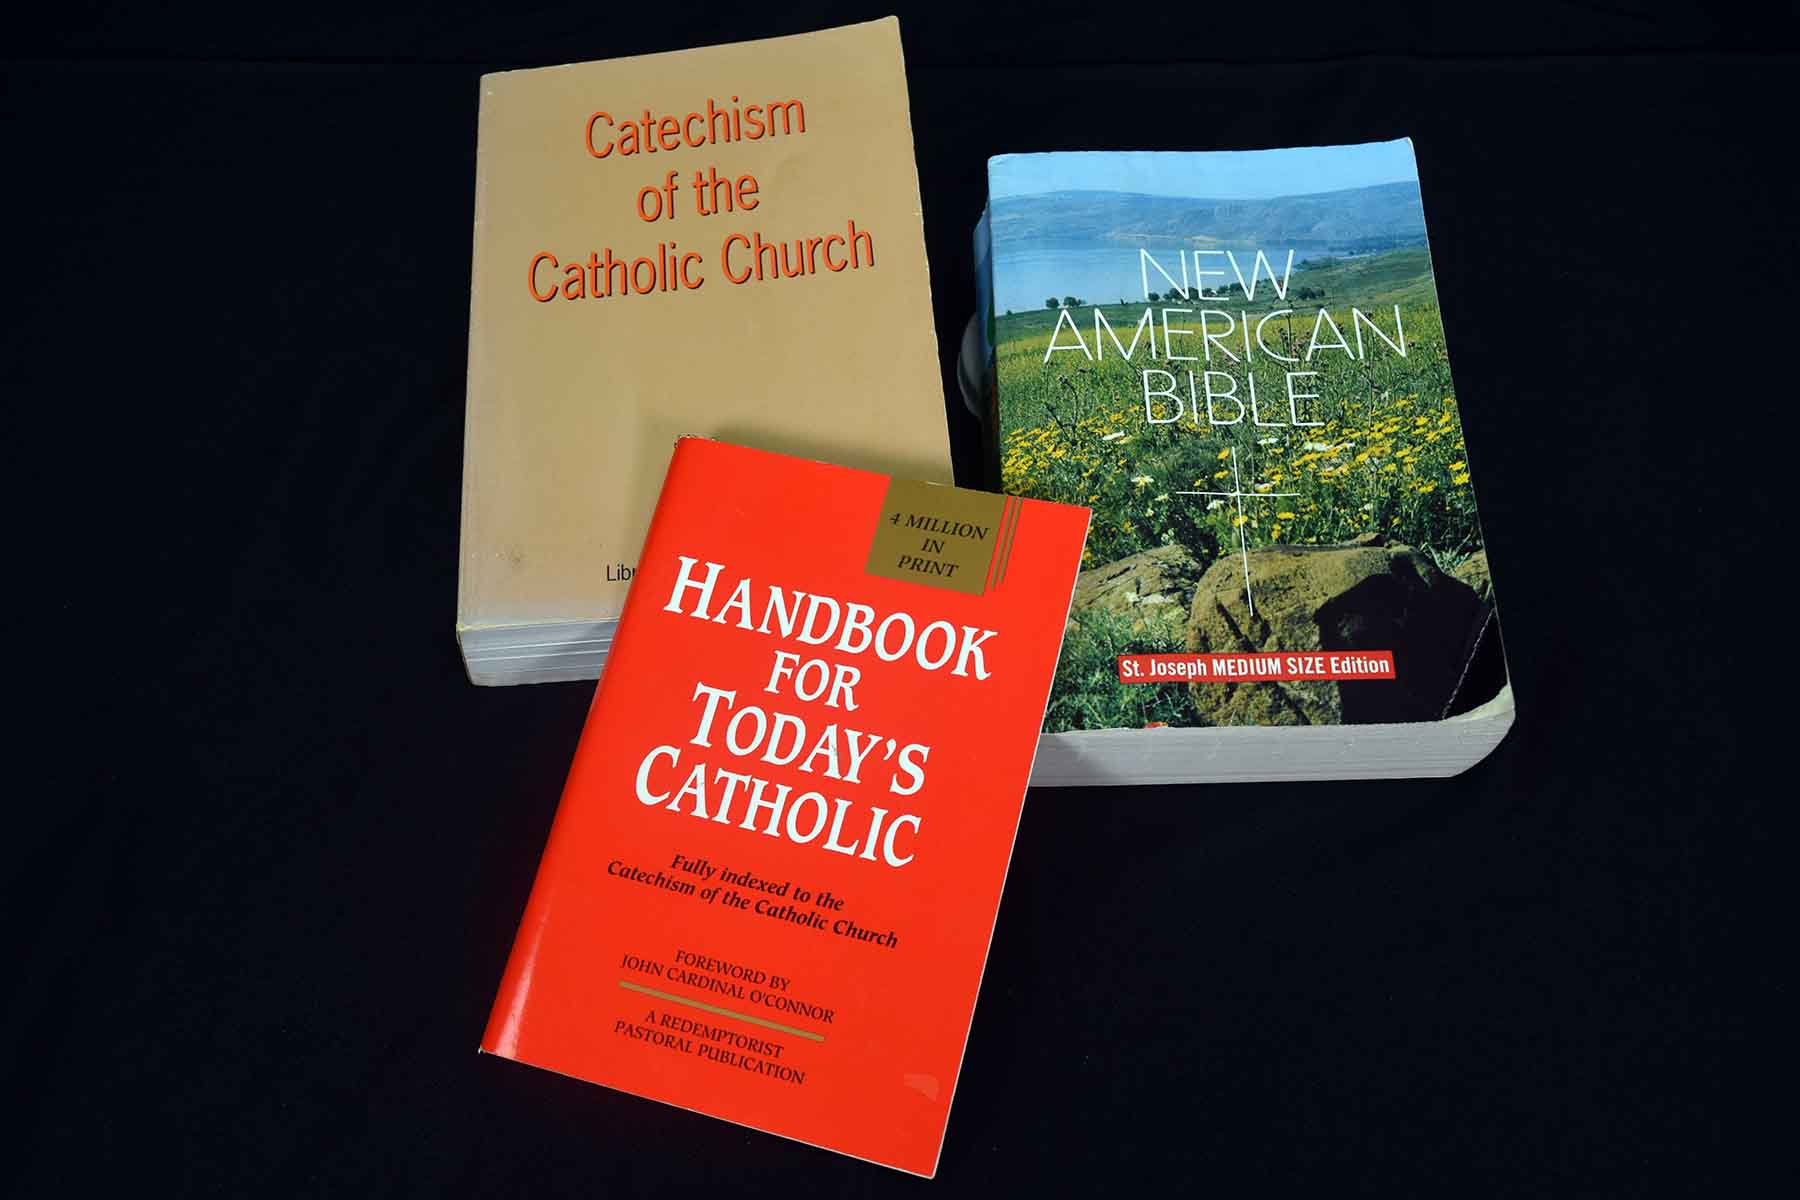 B11_Adult_Religious_book_-_The_New_American_Bible,_Catechism_of_the_Catholic_Church,_Index__ccml.jpg